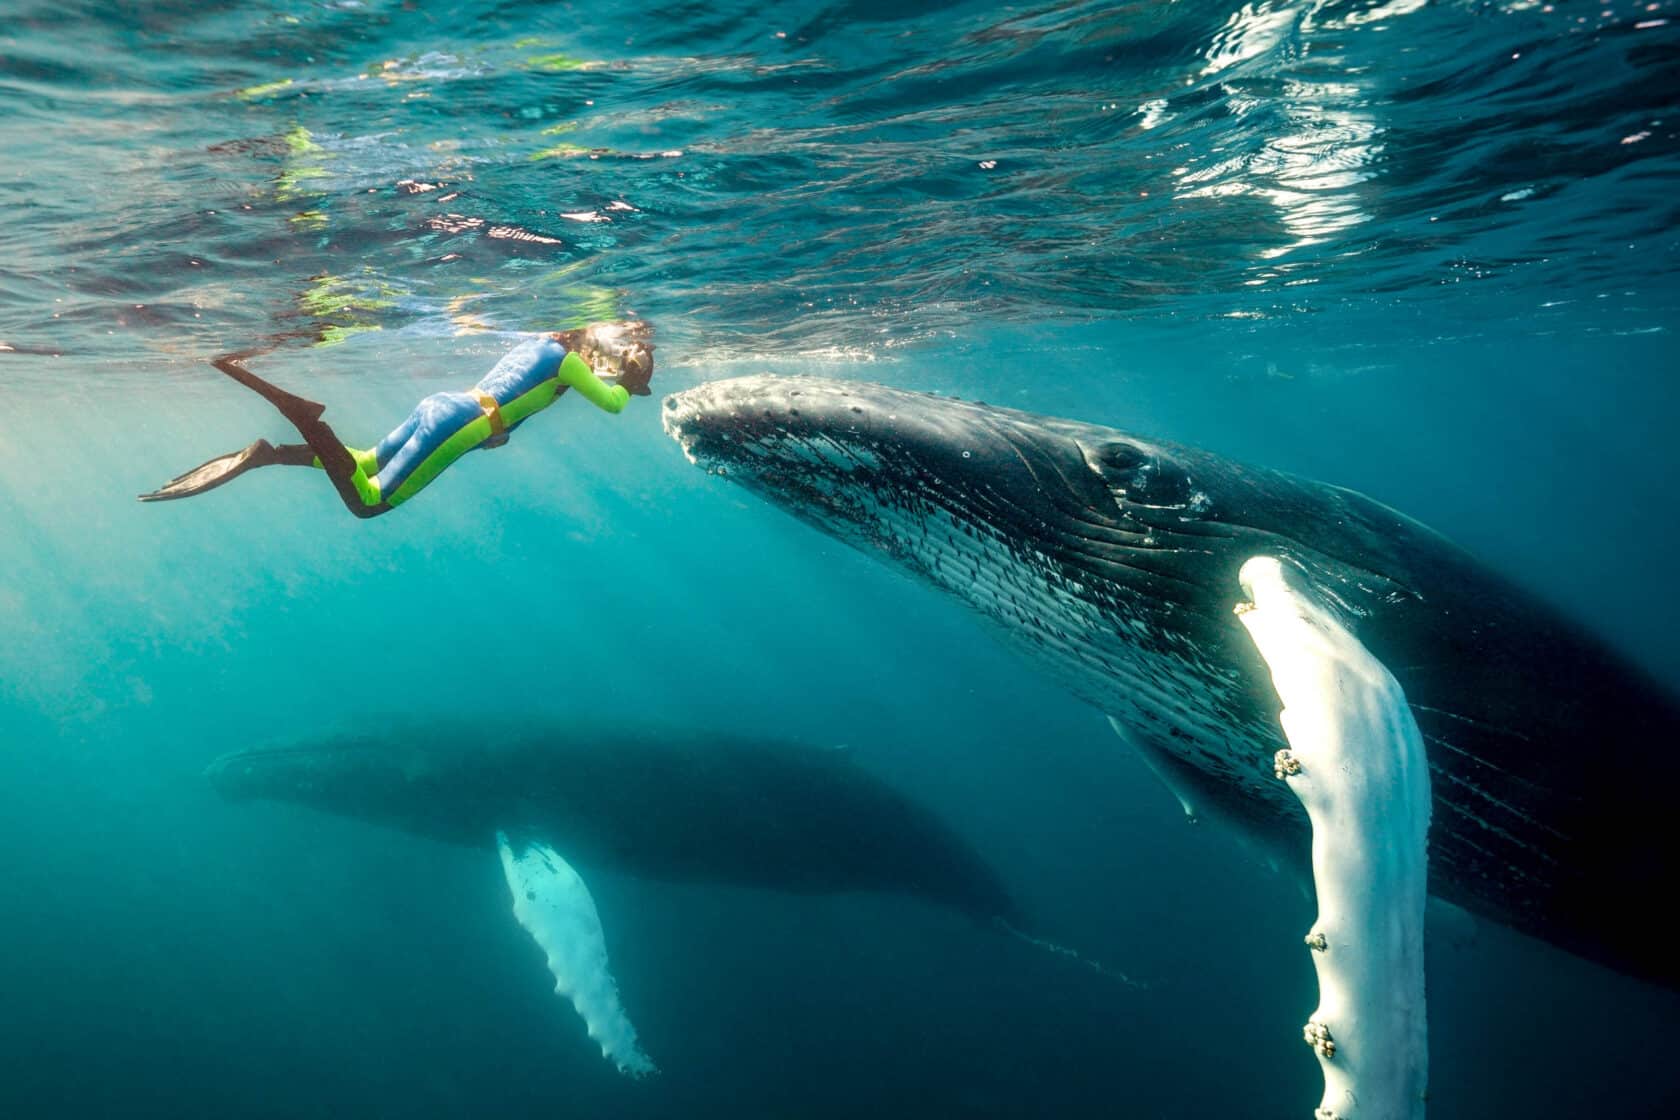 A person snorkeling beside a humpback whale.